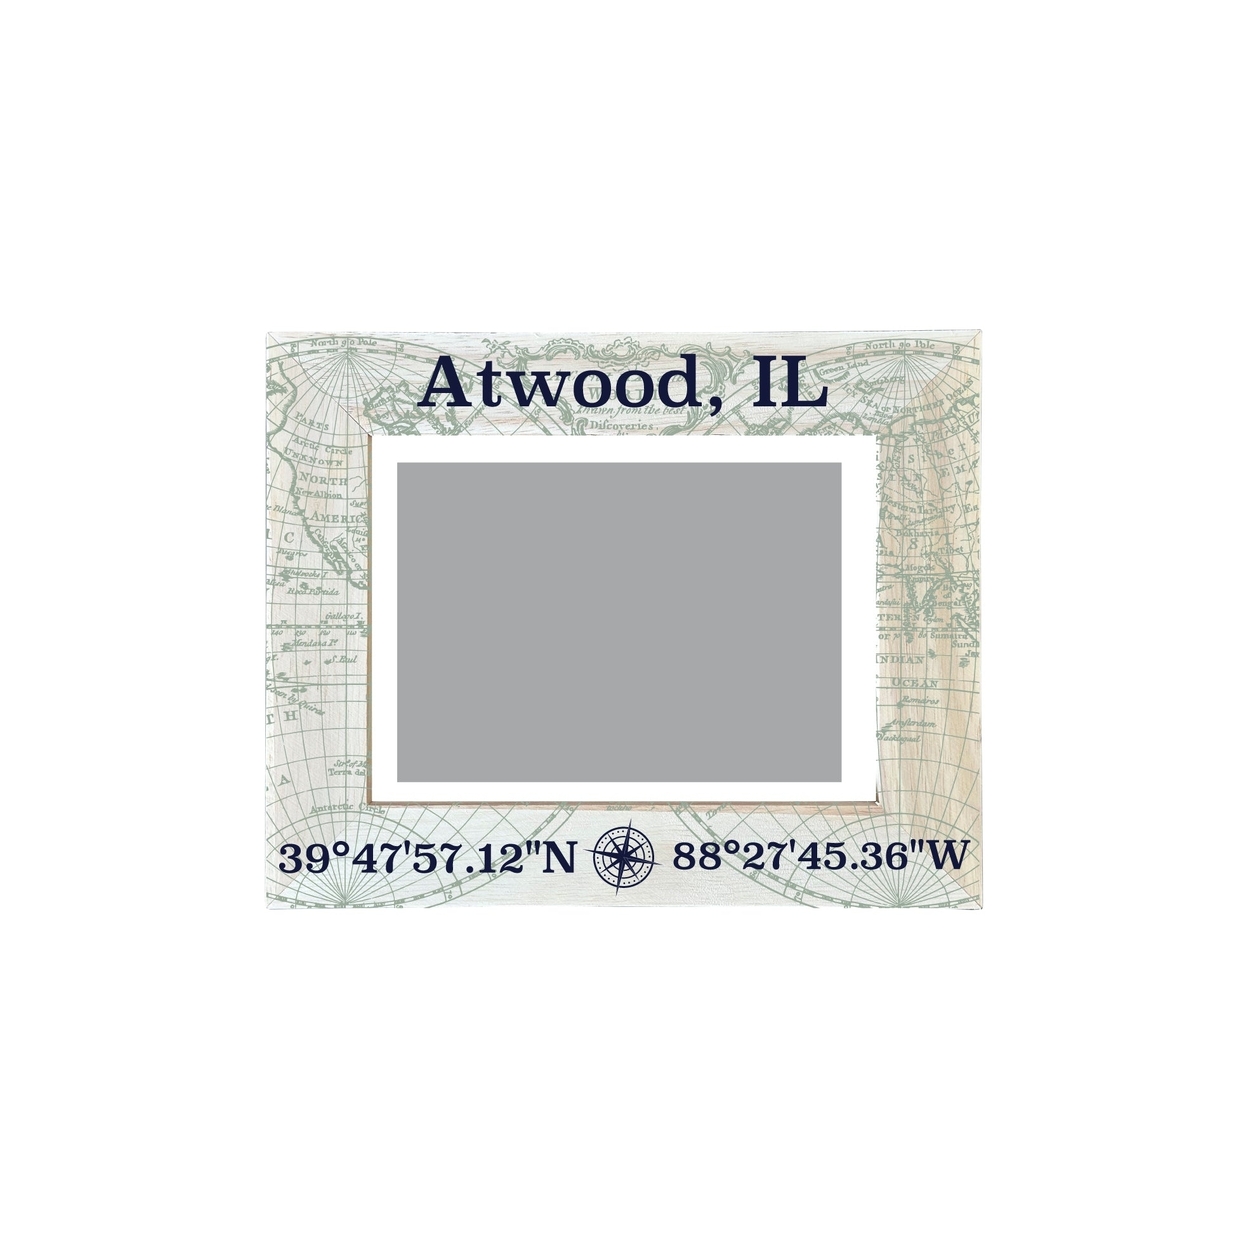 Atwood Illinois Souvenir Wooden Photo Frame Compass Coordinates Design Matted To 4 X 6